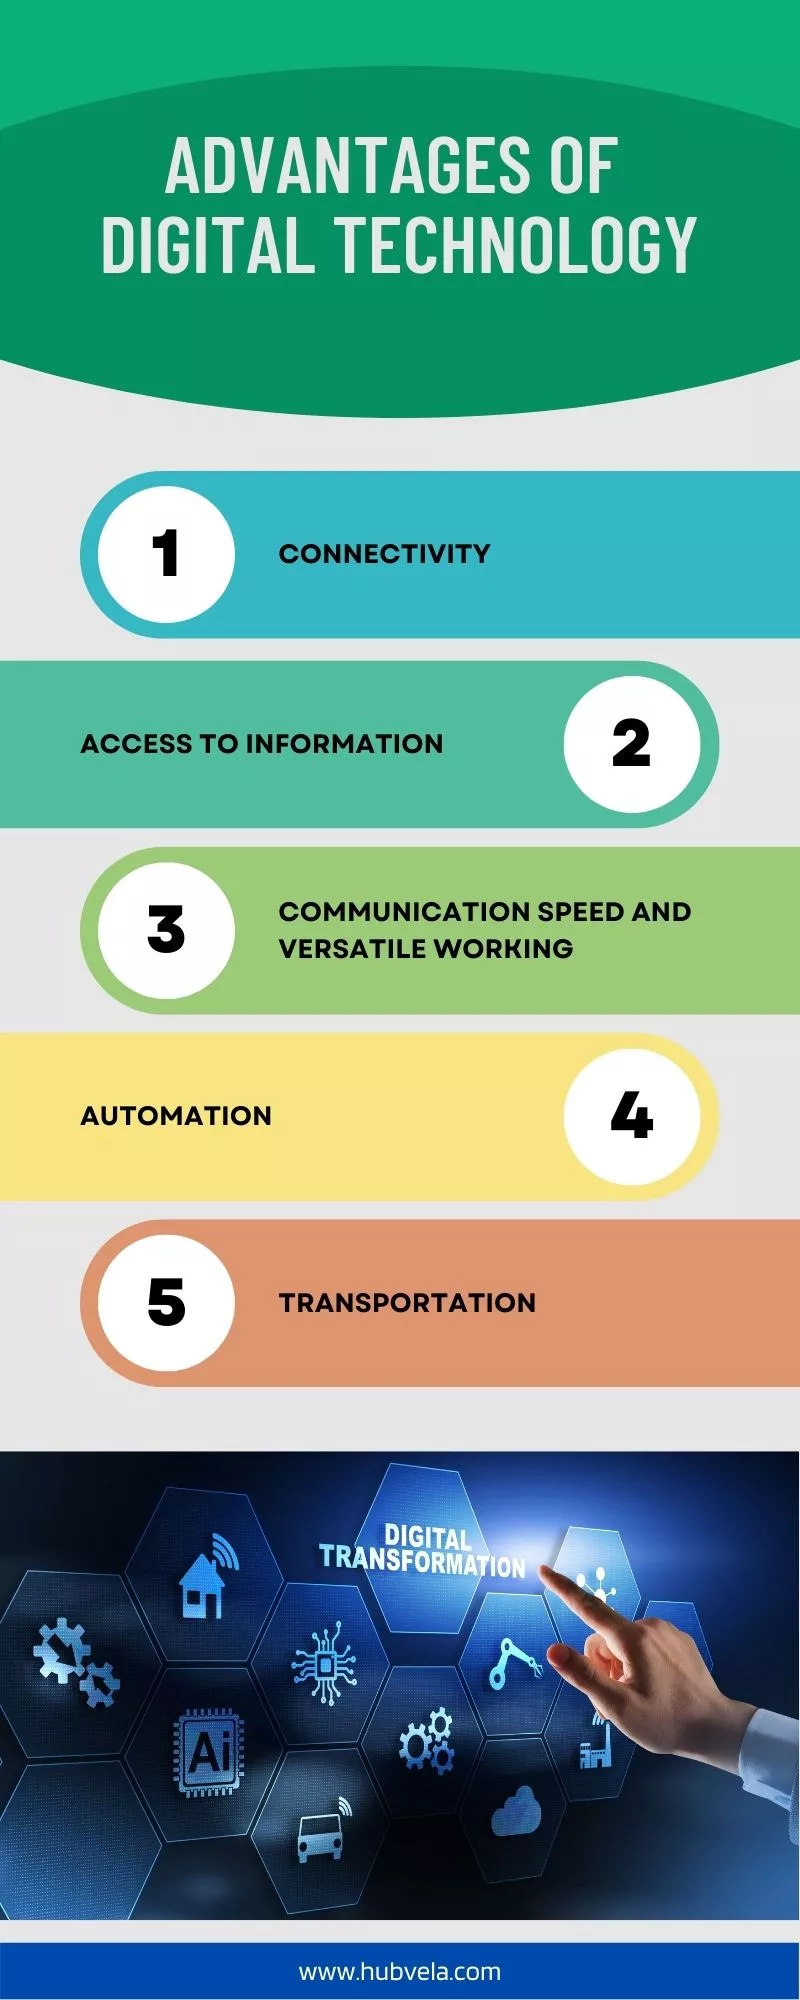 Advantages of Digital Technology Infographic